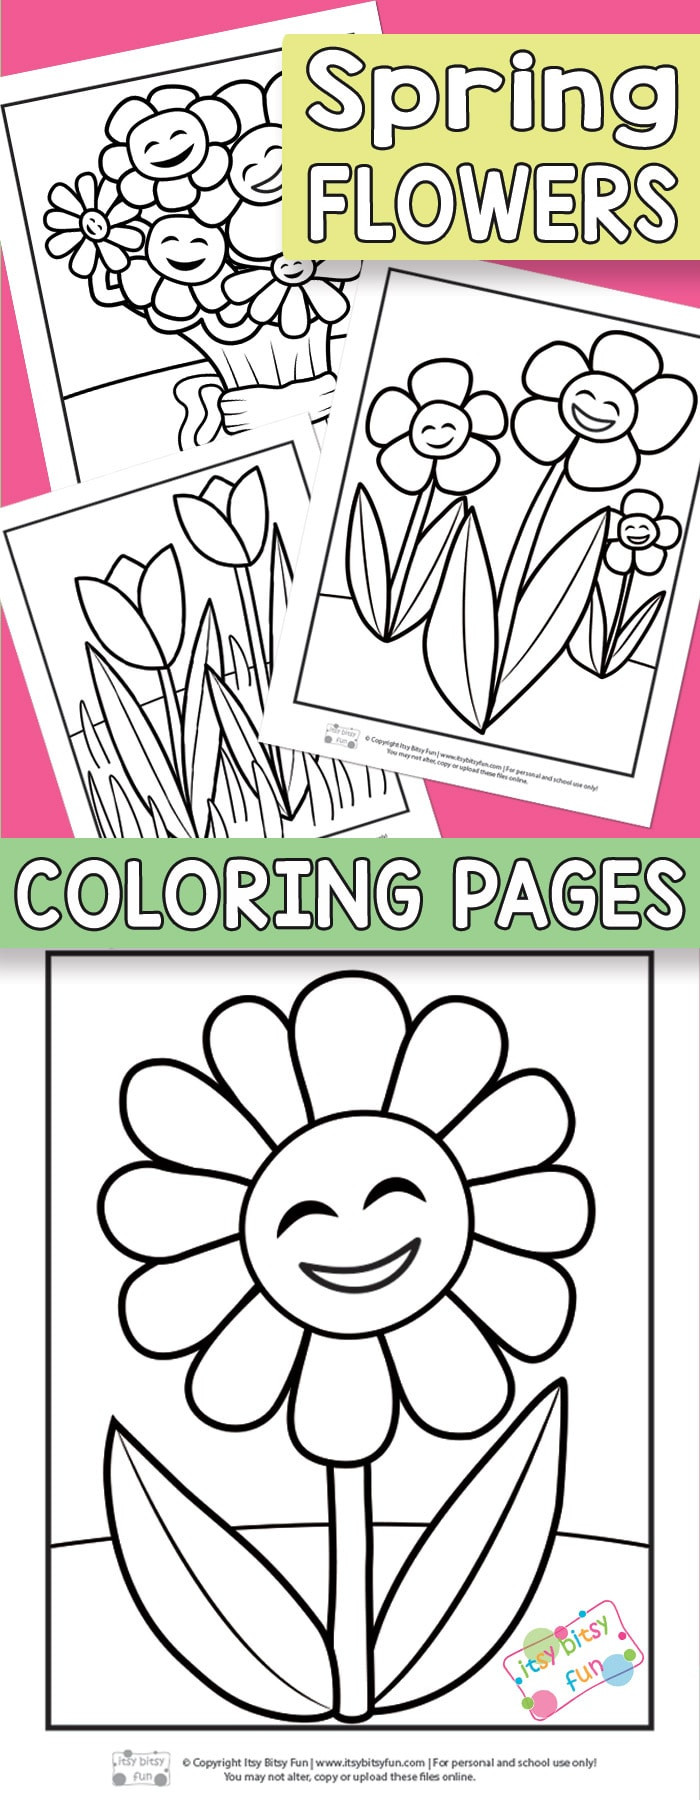 Fun Kids Coloring Pages
 Flower Coloring Pages for Kids Itsy Bitsy Fun